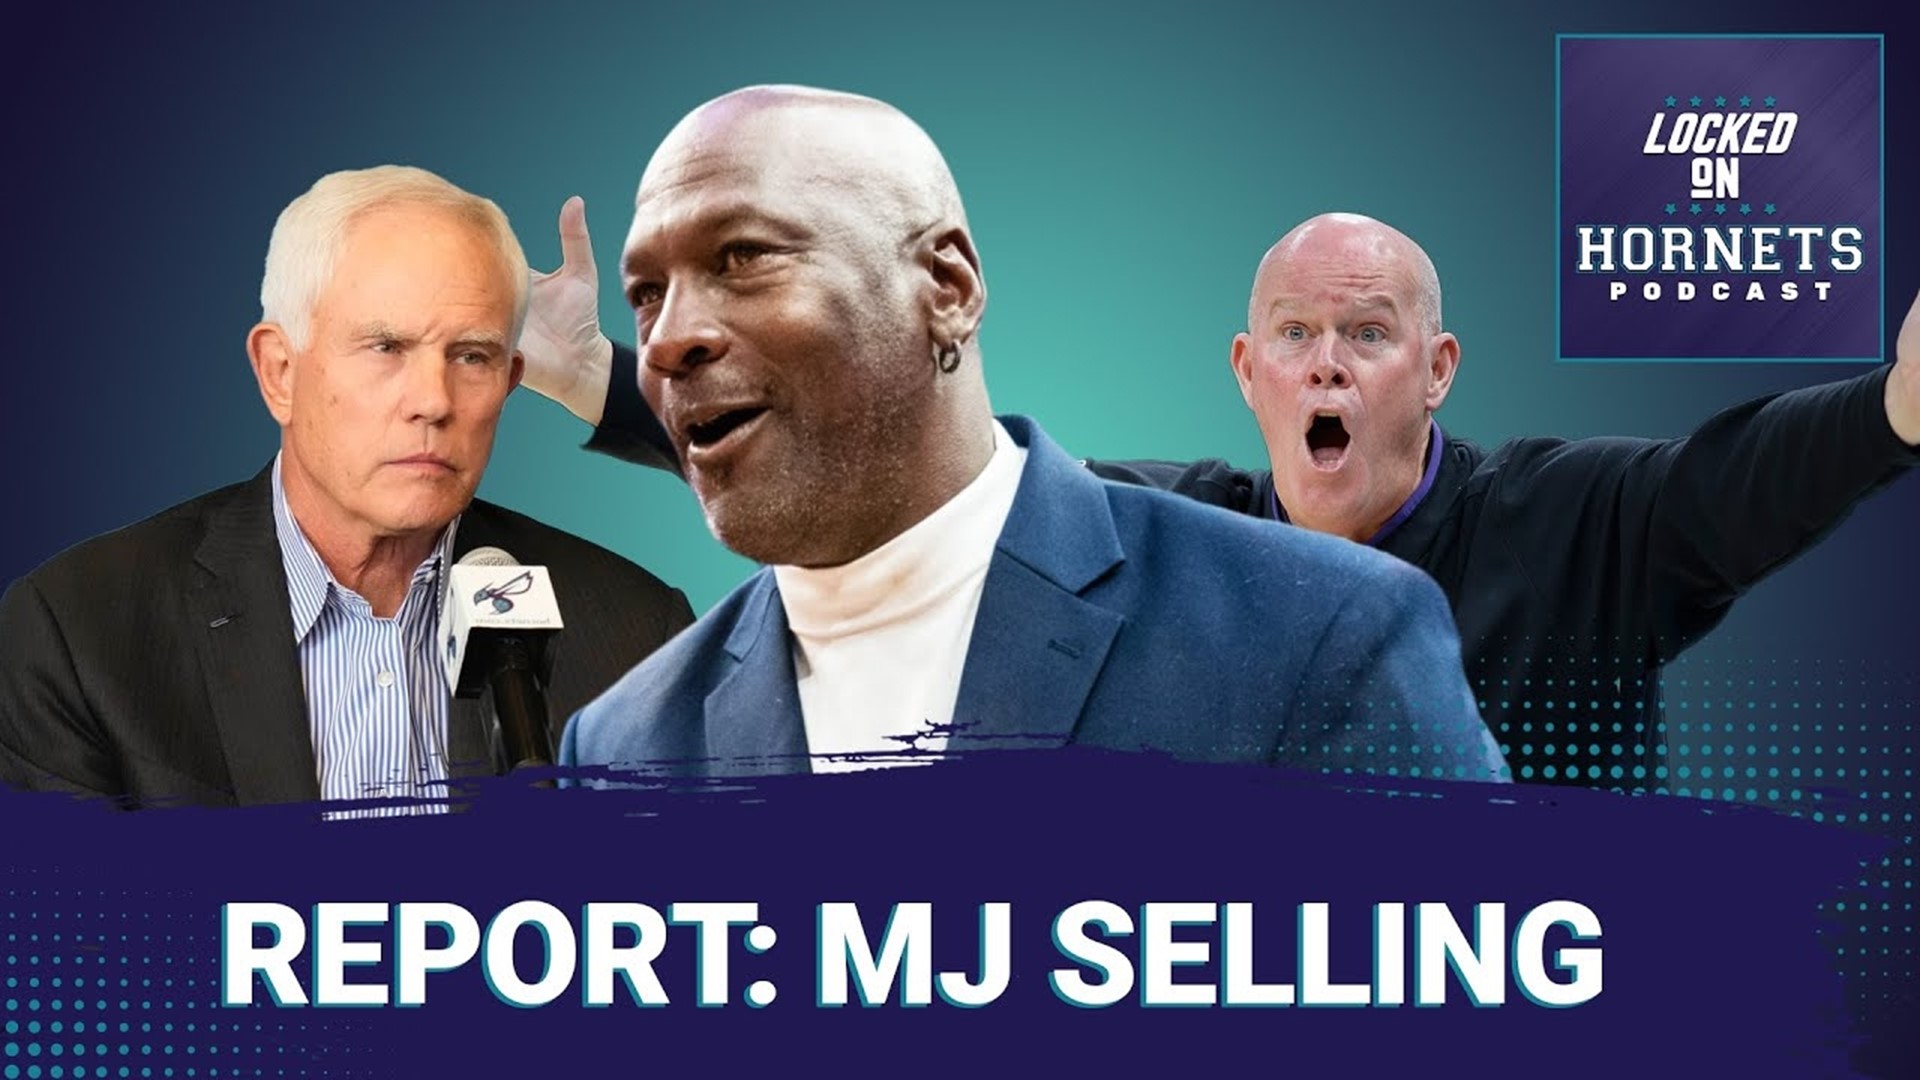 ESPN's Adrian Wojnarowski drops a bombshell report on Michael Jordan's talks to sell a significant part of his majority stake in the team.